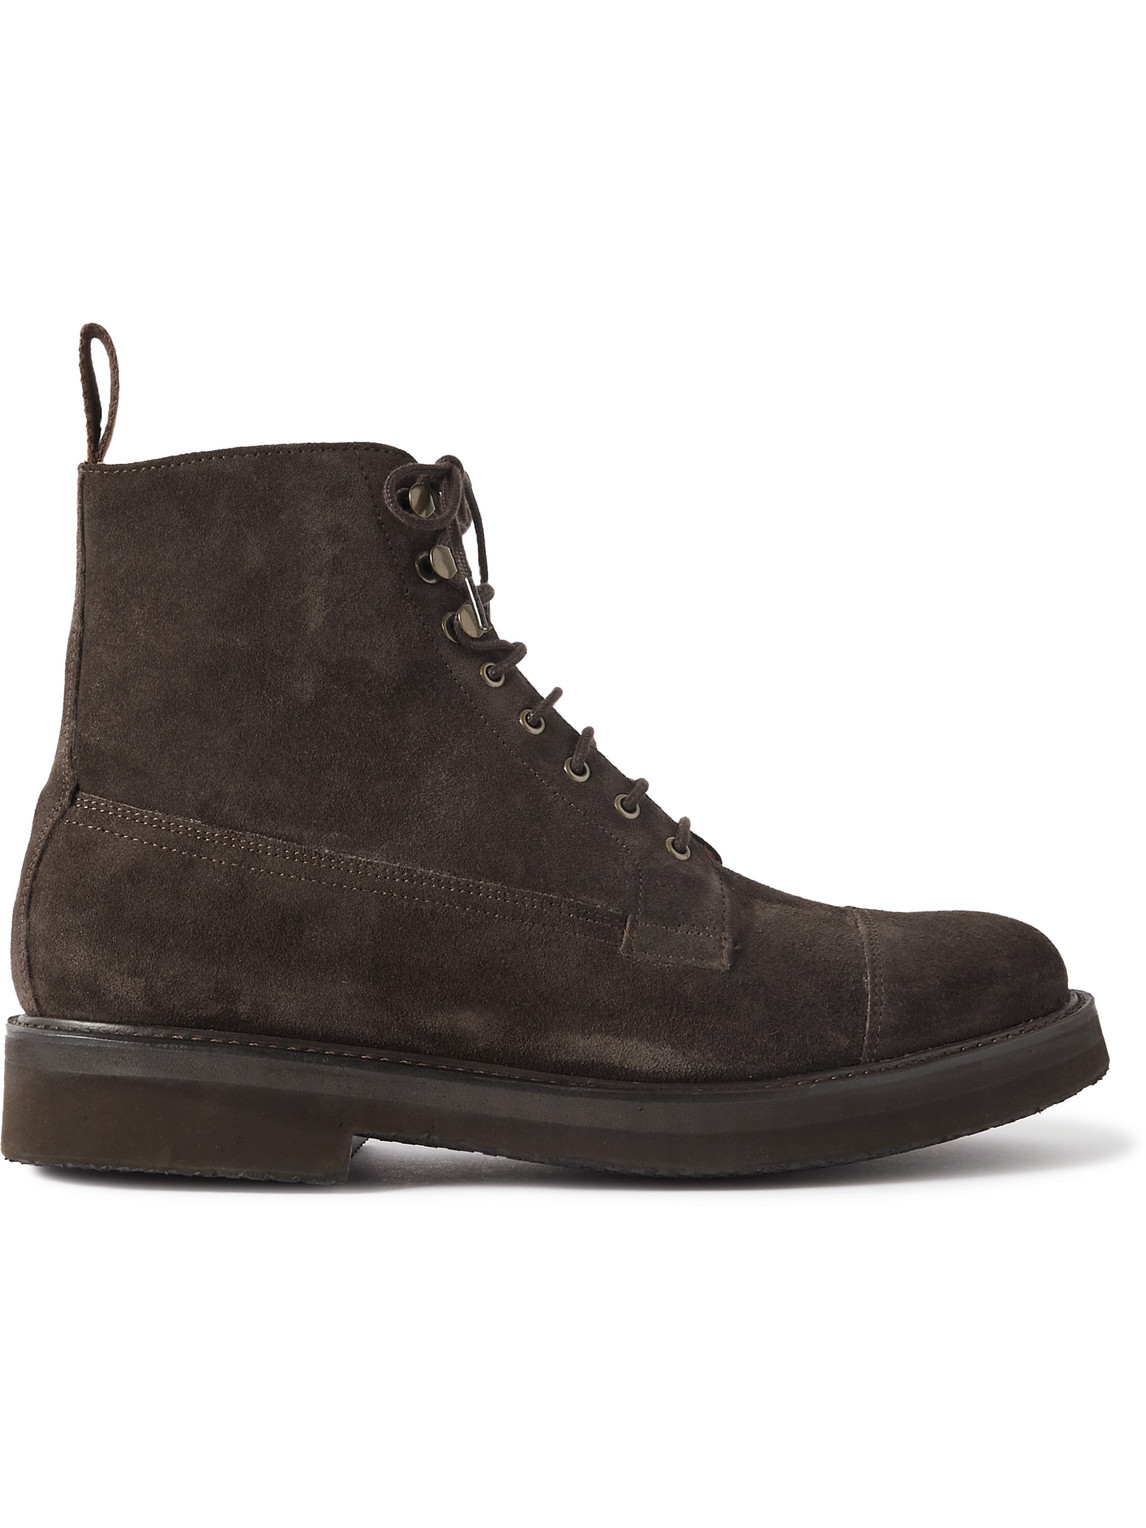 GRENSON HARRY SUEDE LACE-UP BOOTS